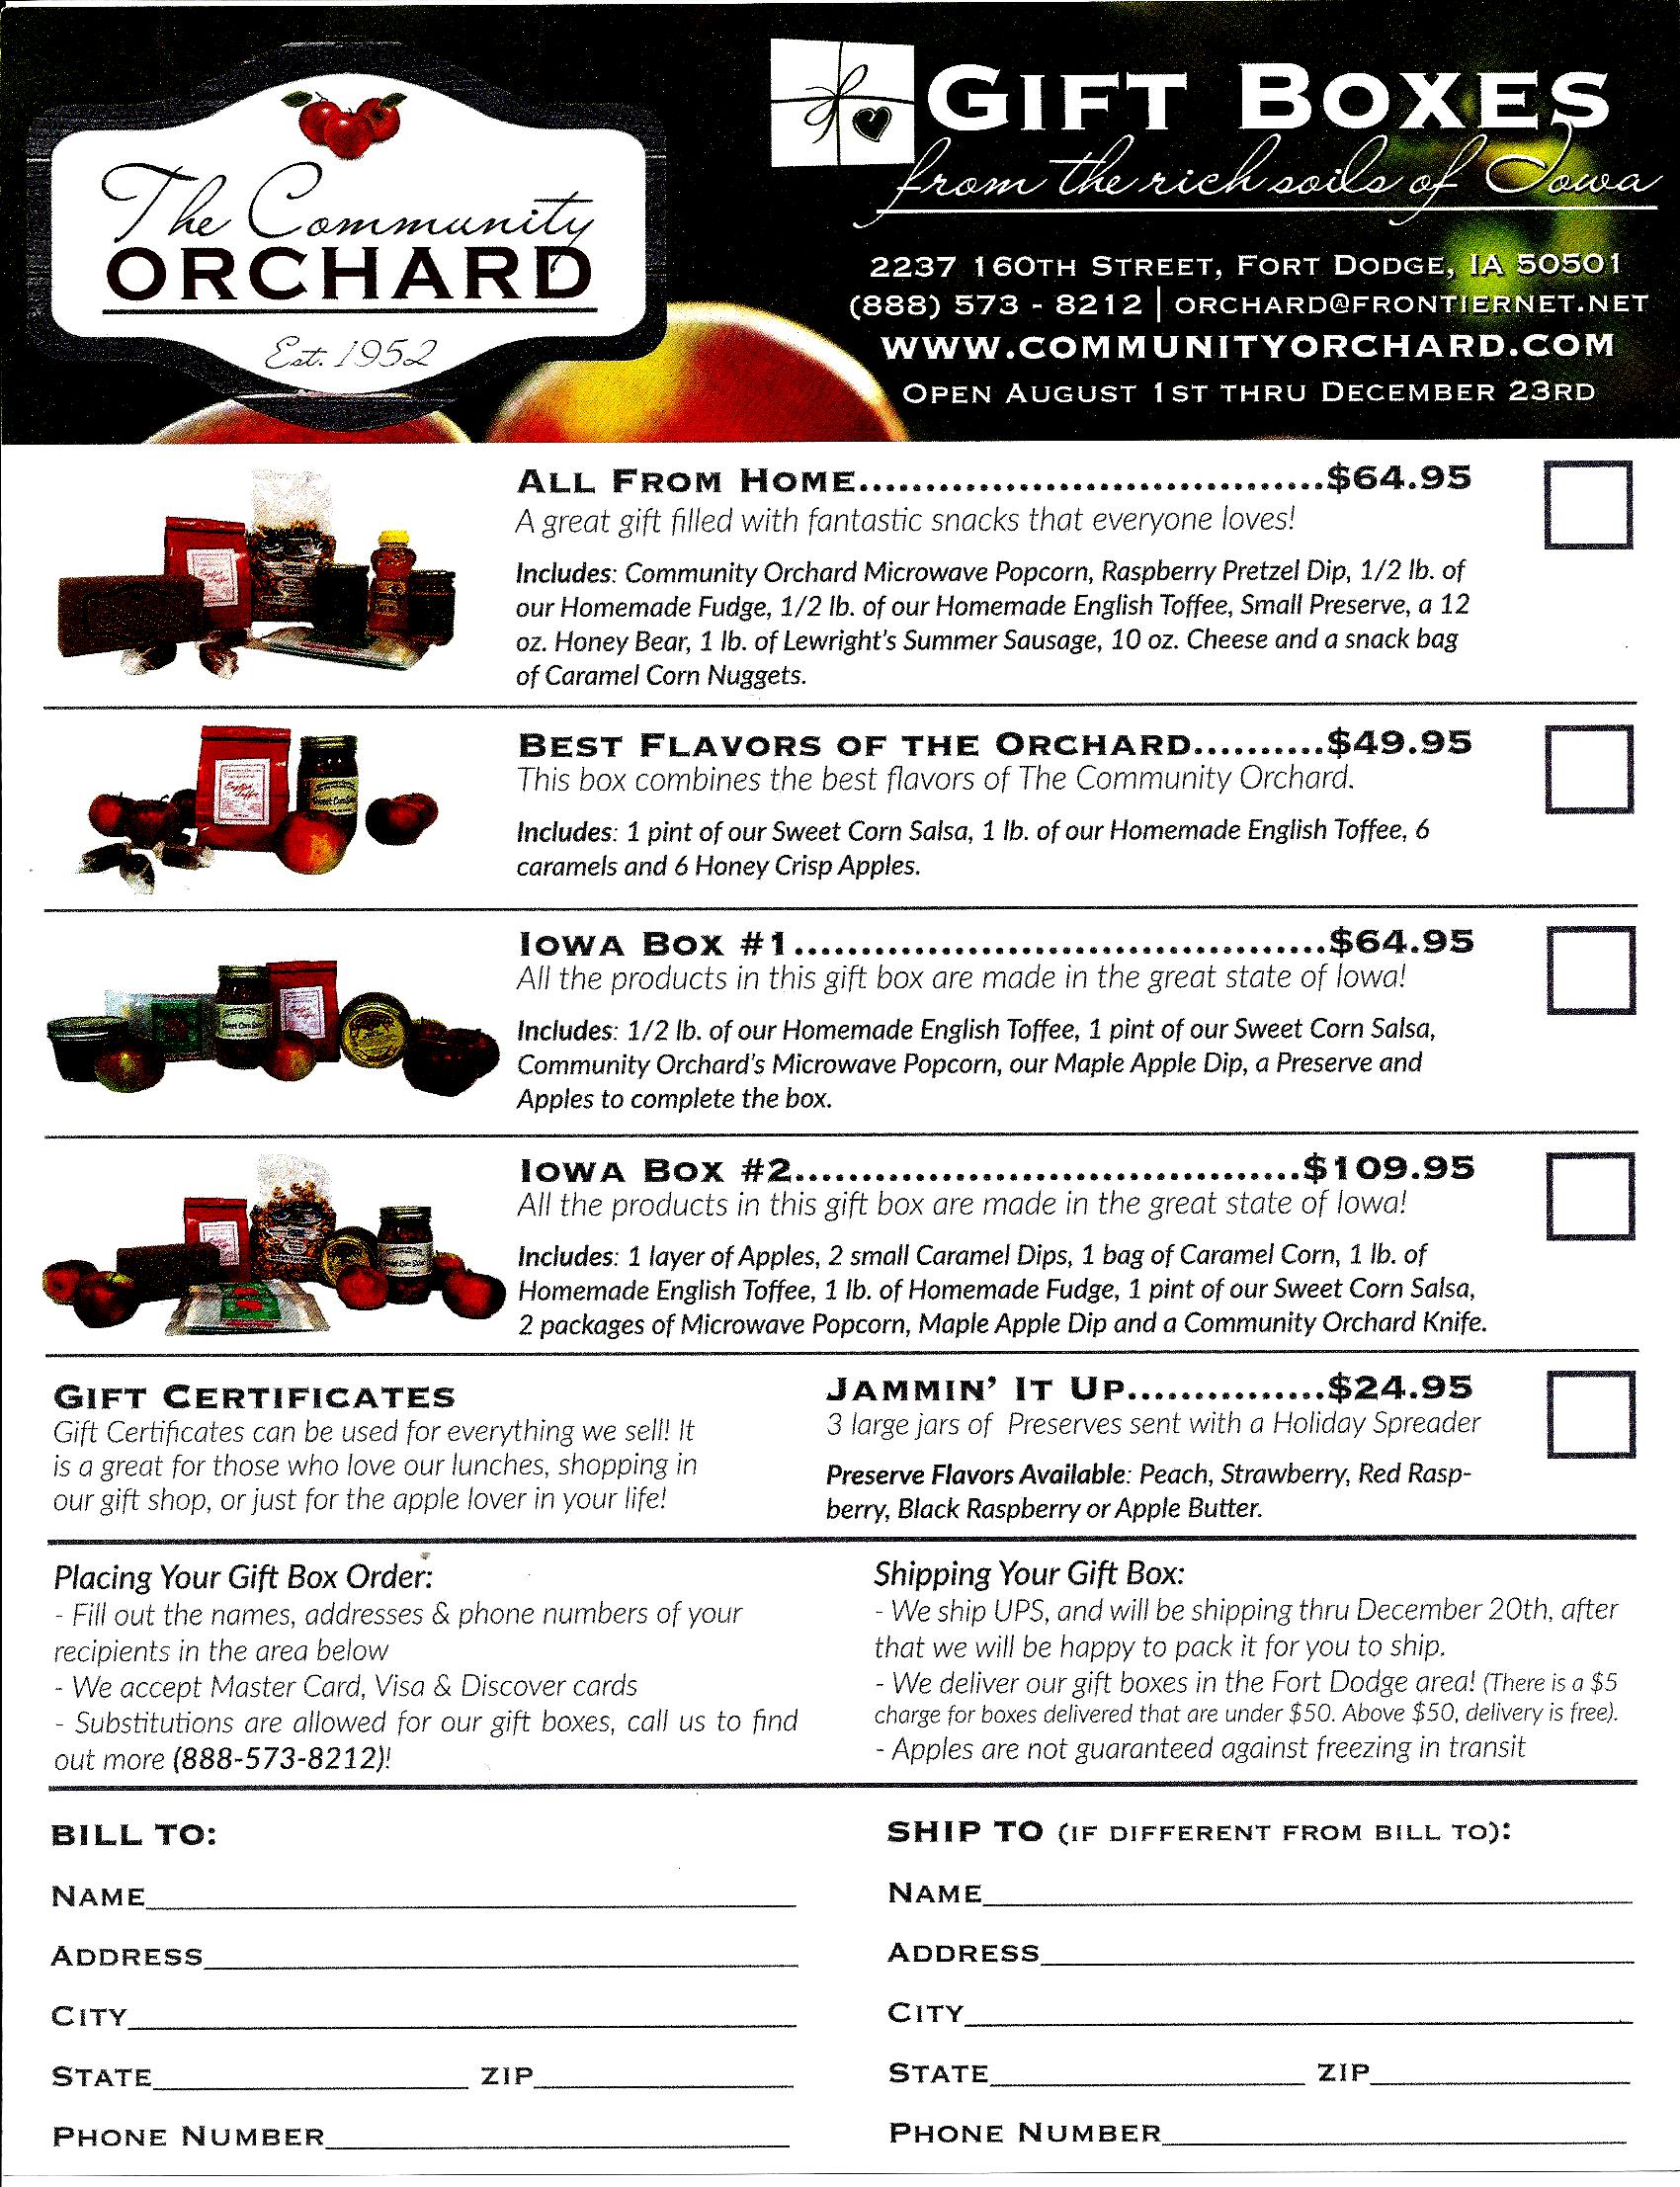 2014 Community Orchard Gift Boxes Online Ordering